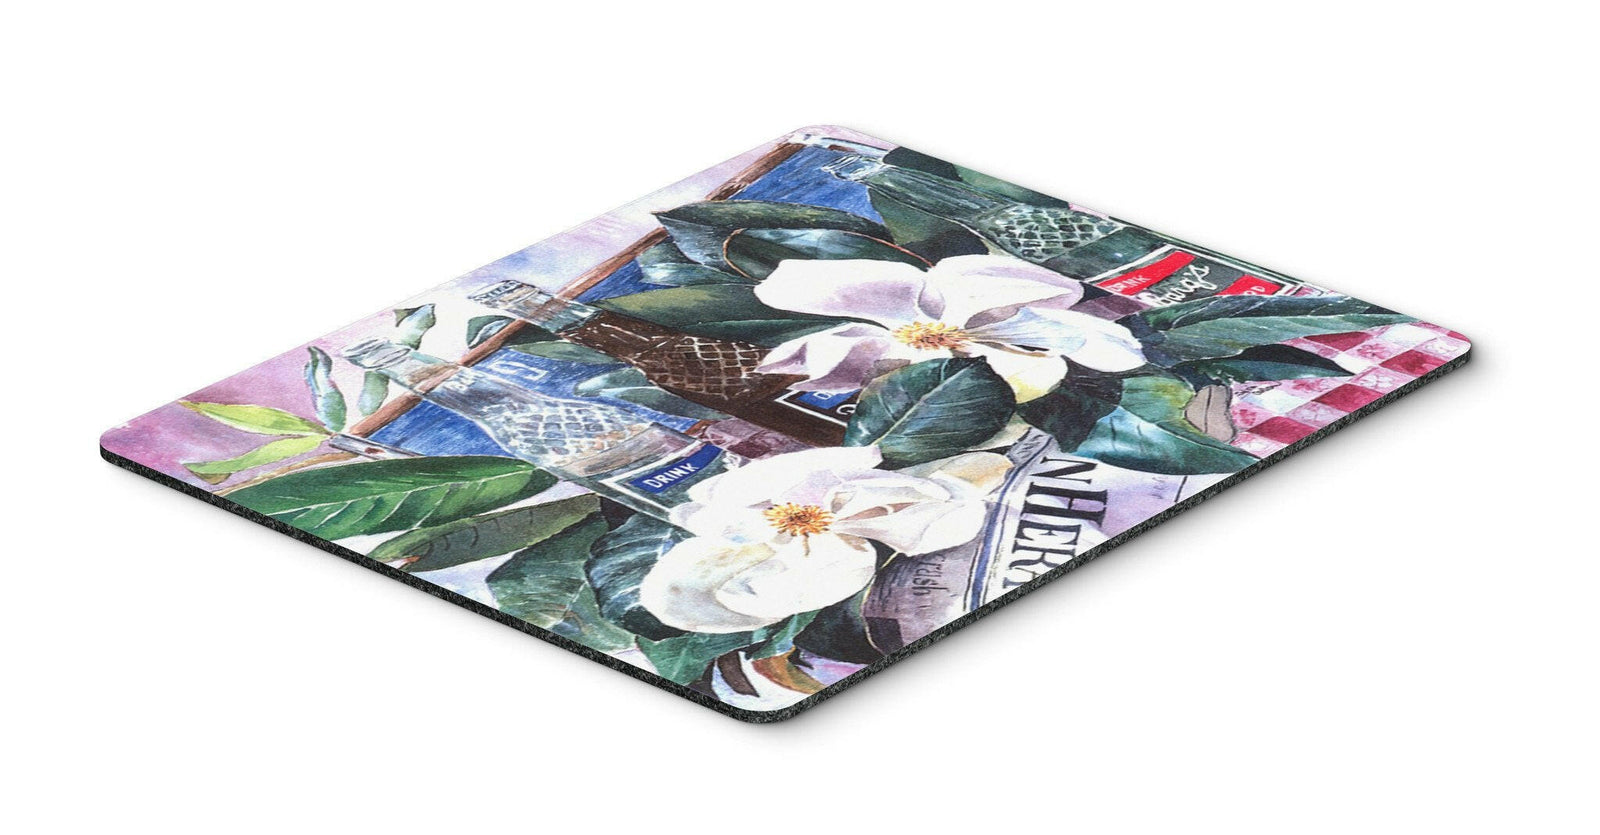 Barq's and Magnolia Mouse pad, hot pad, or trivet by Caroline's Treasures